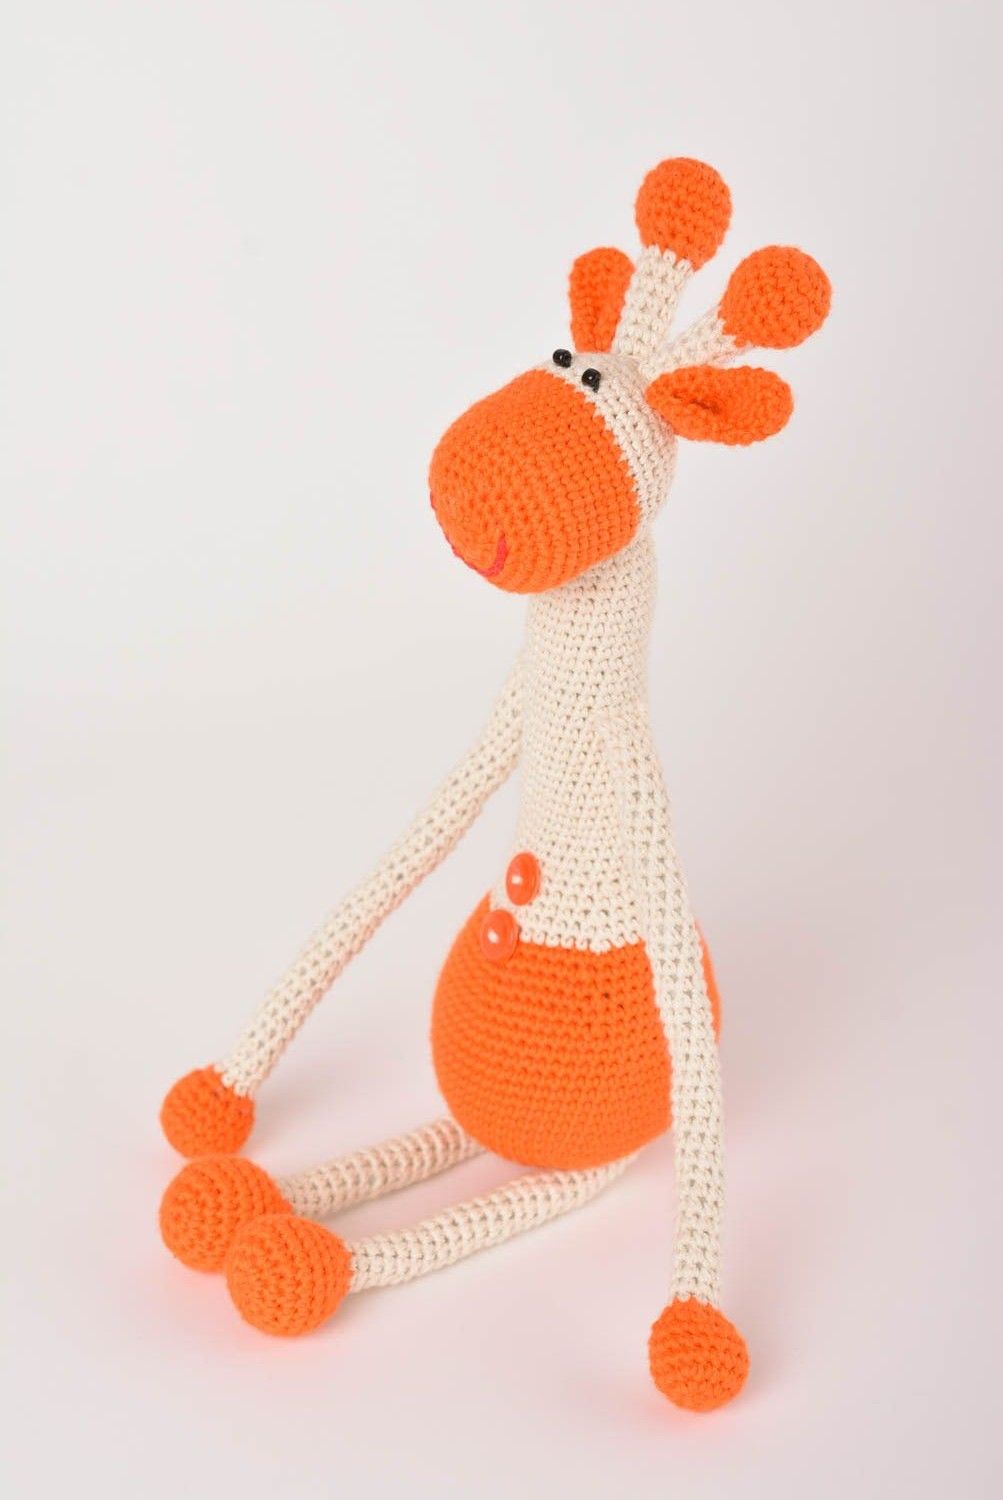 Handmade toy crocheted toy for baby unusual gift ideas animal toy soft toy photo 4